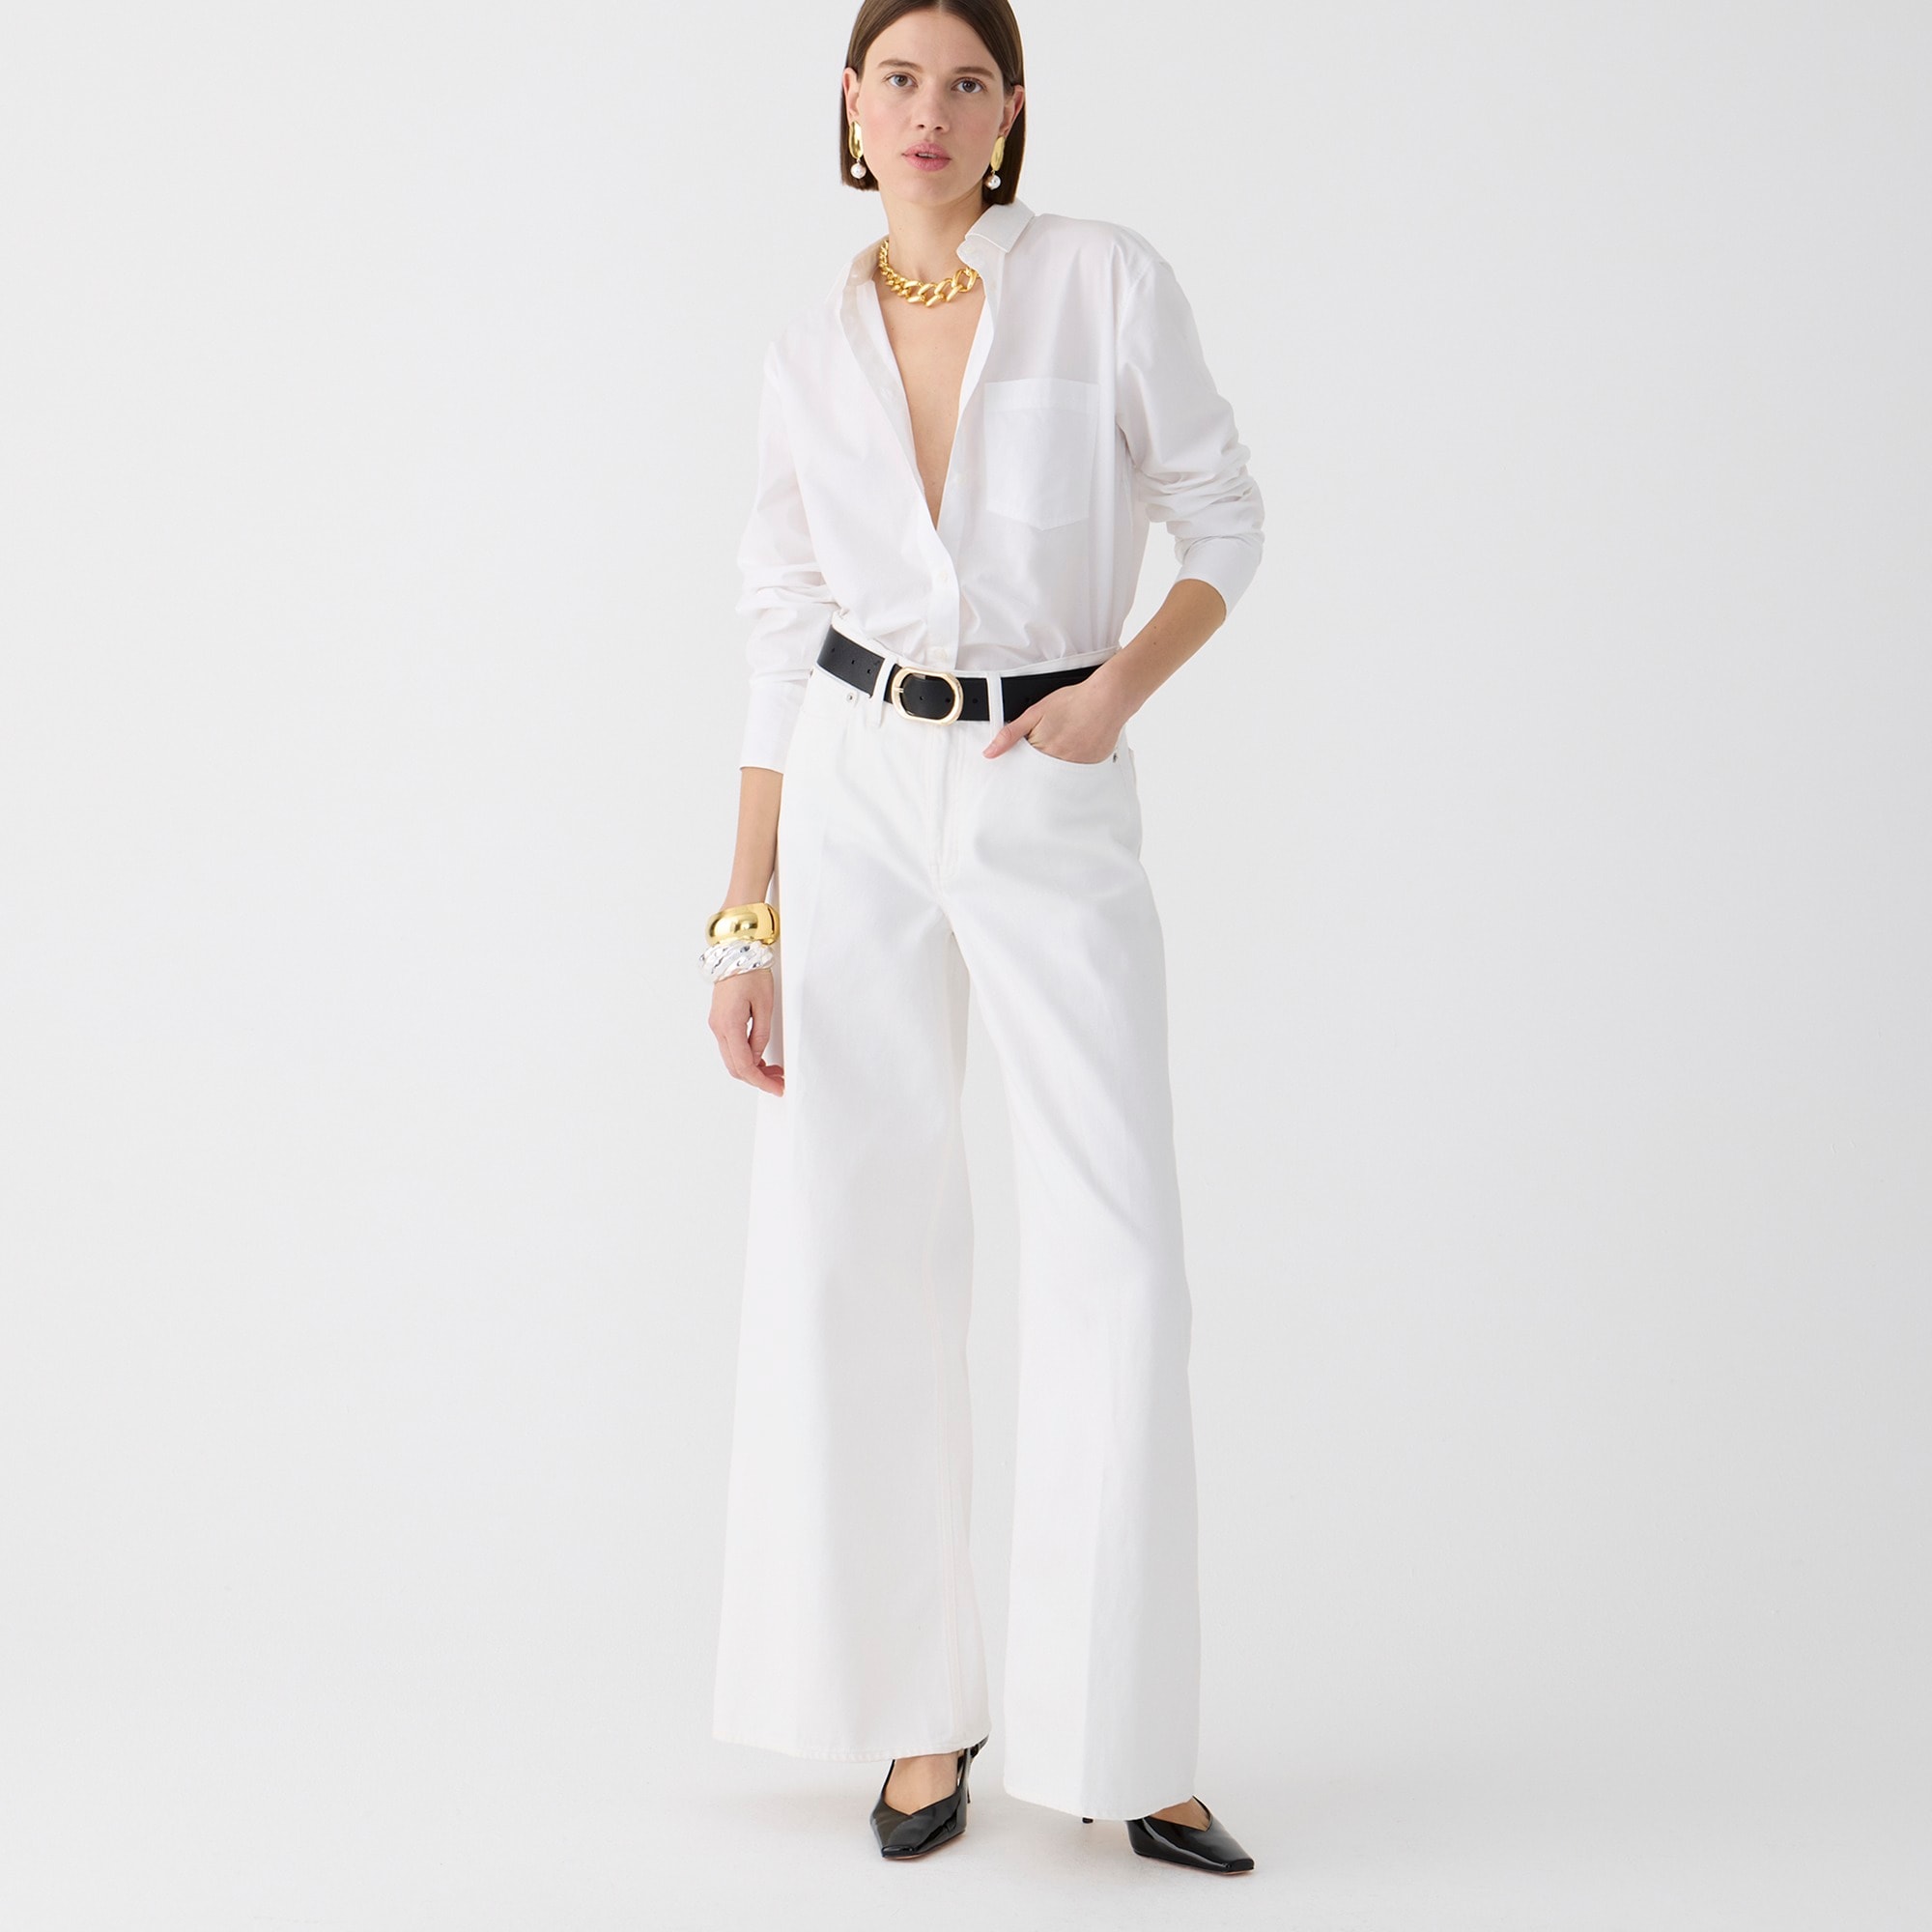  Tall high-rise superwide-leg jean in white